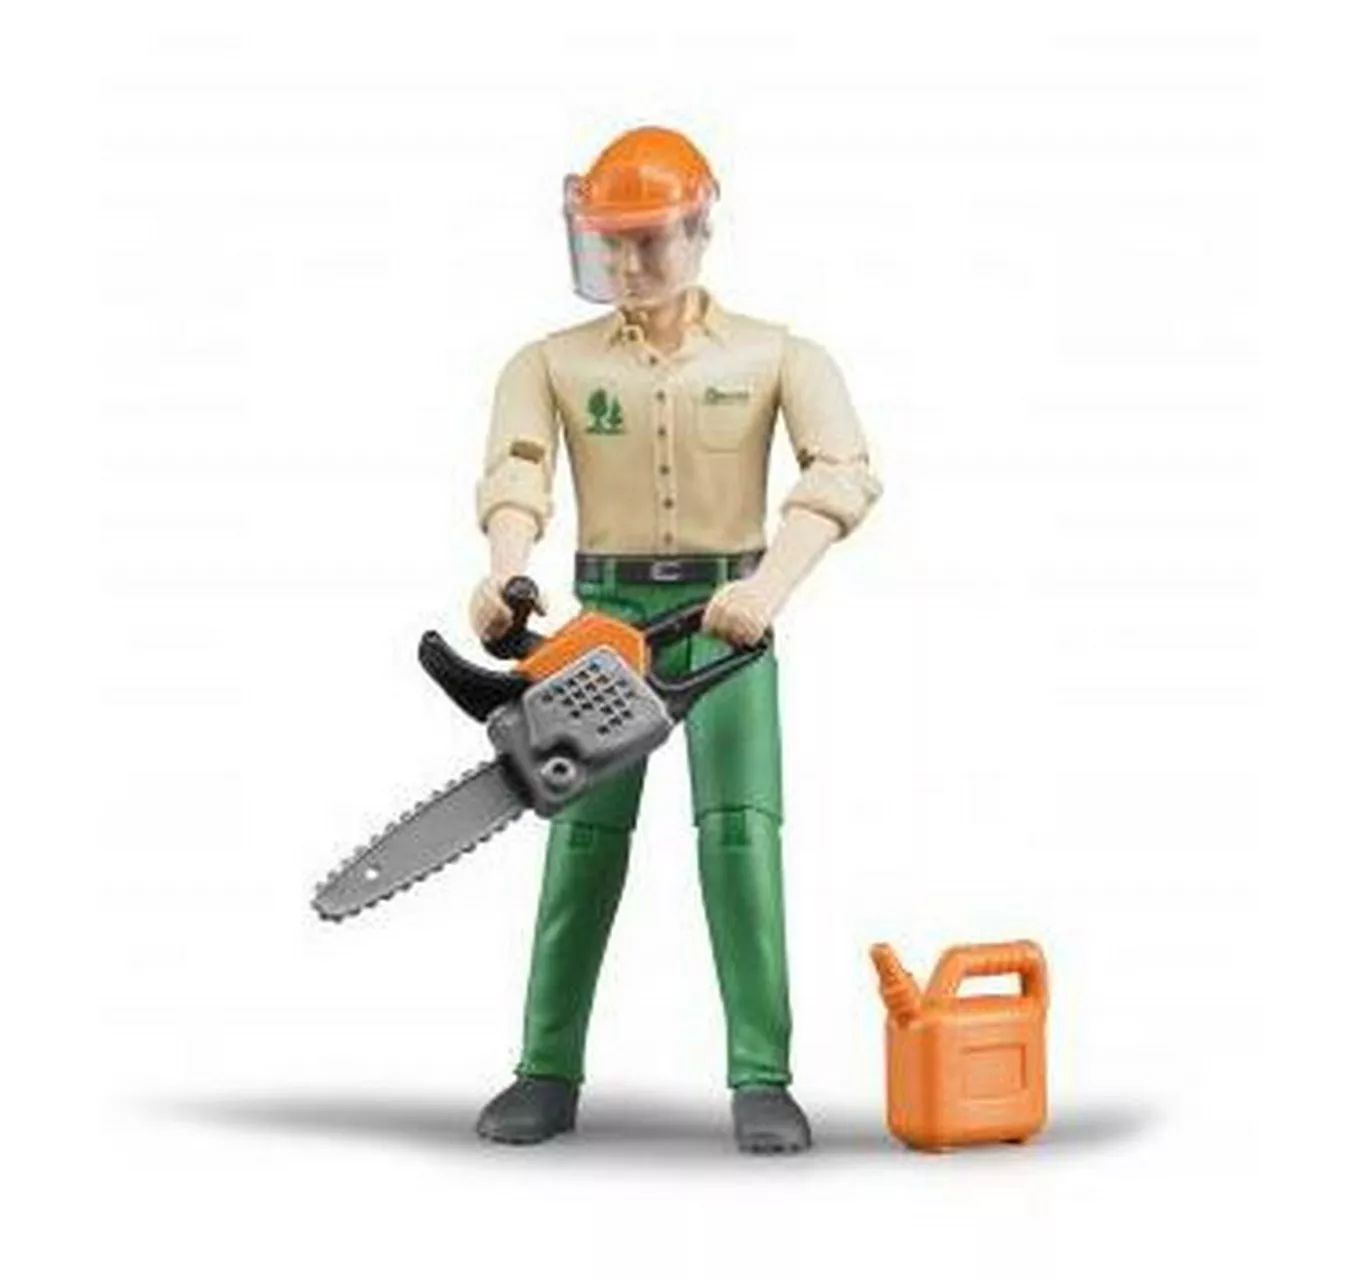 Forestry Worker & Accessories